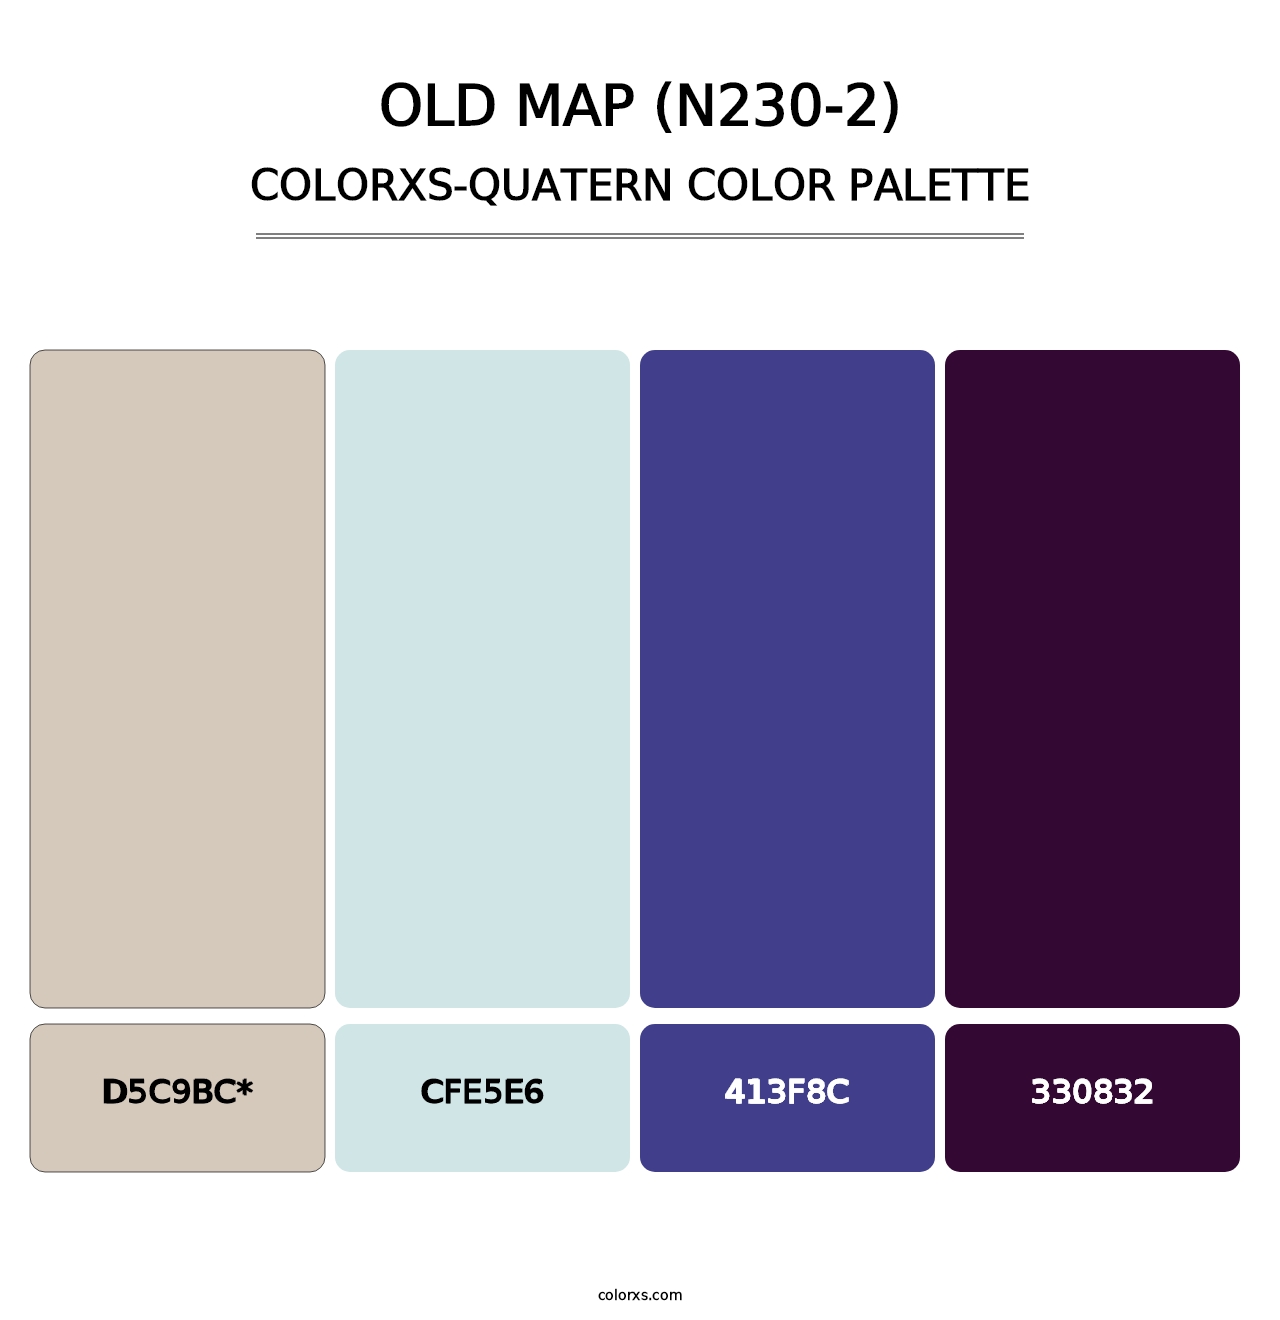 Old Map (N230-2) - Colorxs Quatern Palette